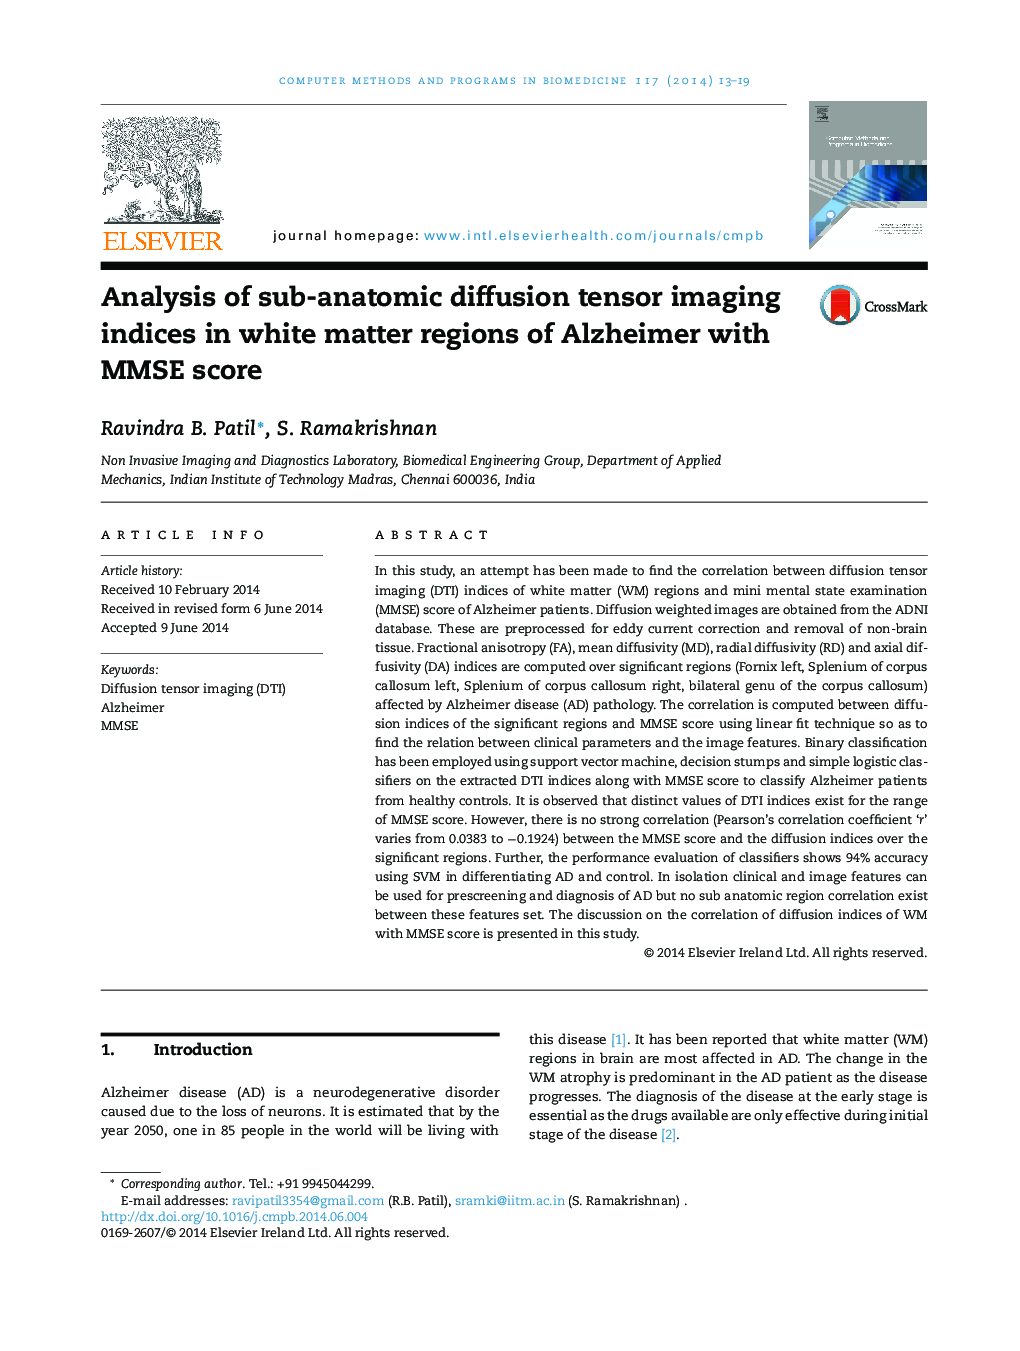 Analysis of sub-anatomic diffusion tensor imaging indices in white matter regions of Alzheimer with MMSE score